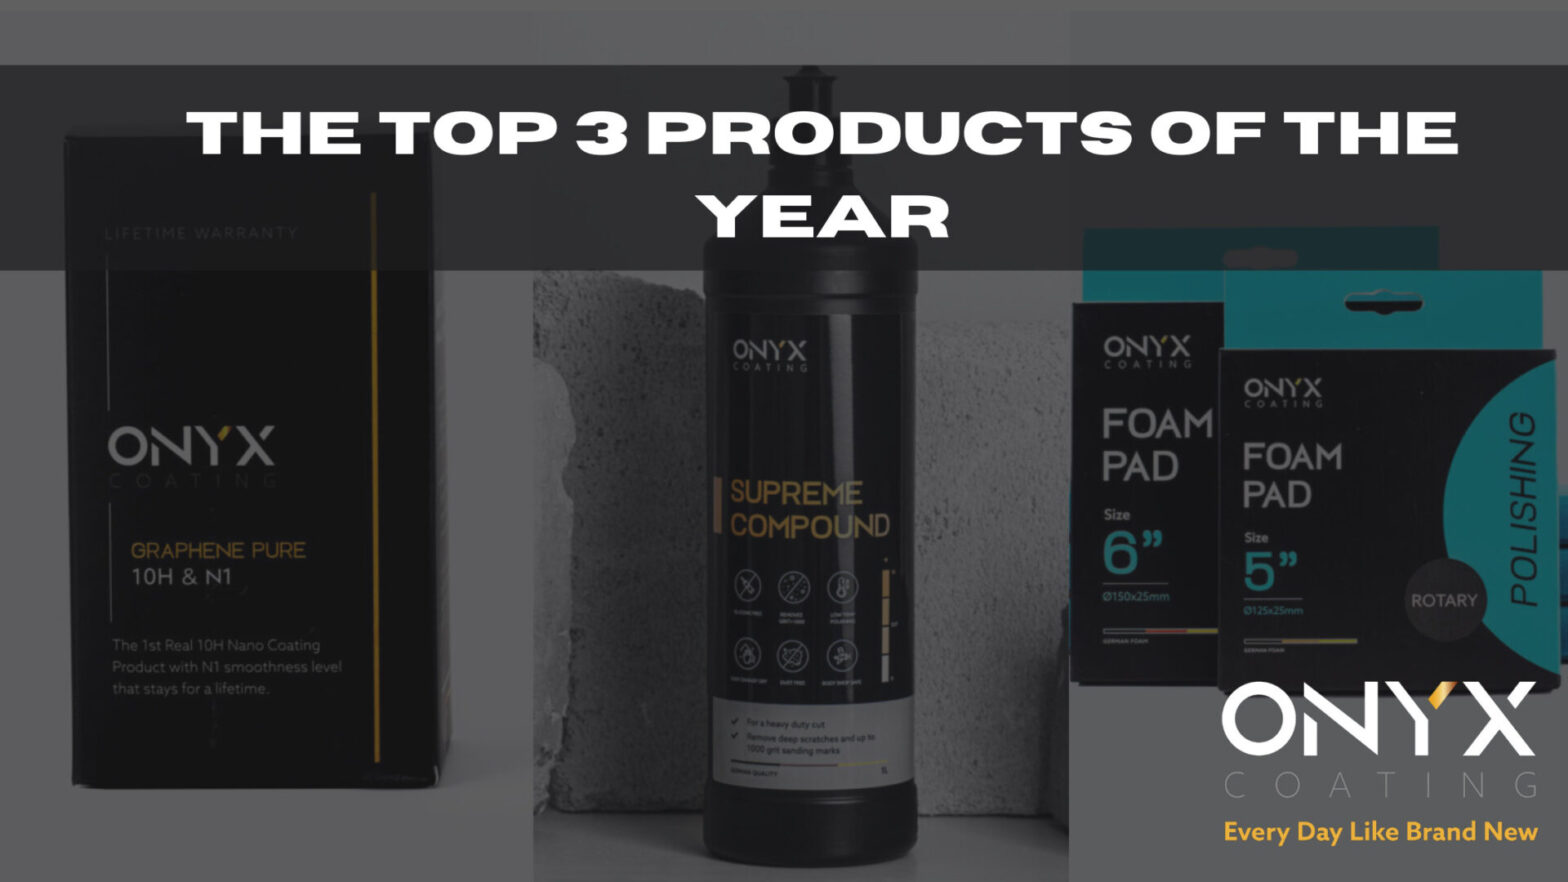 The Top 3 Products of the Year